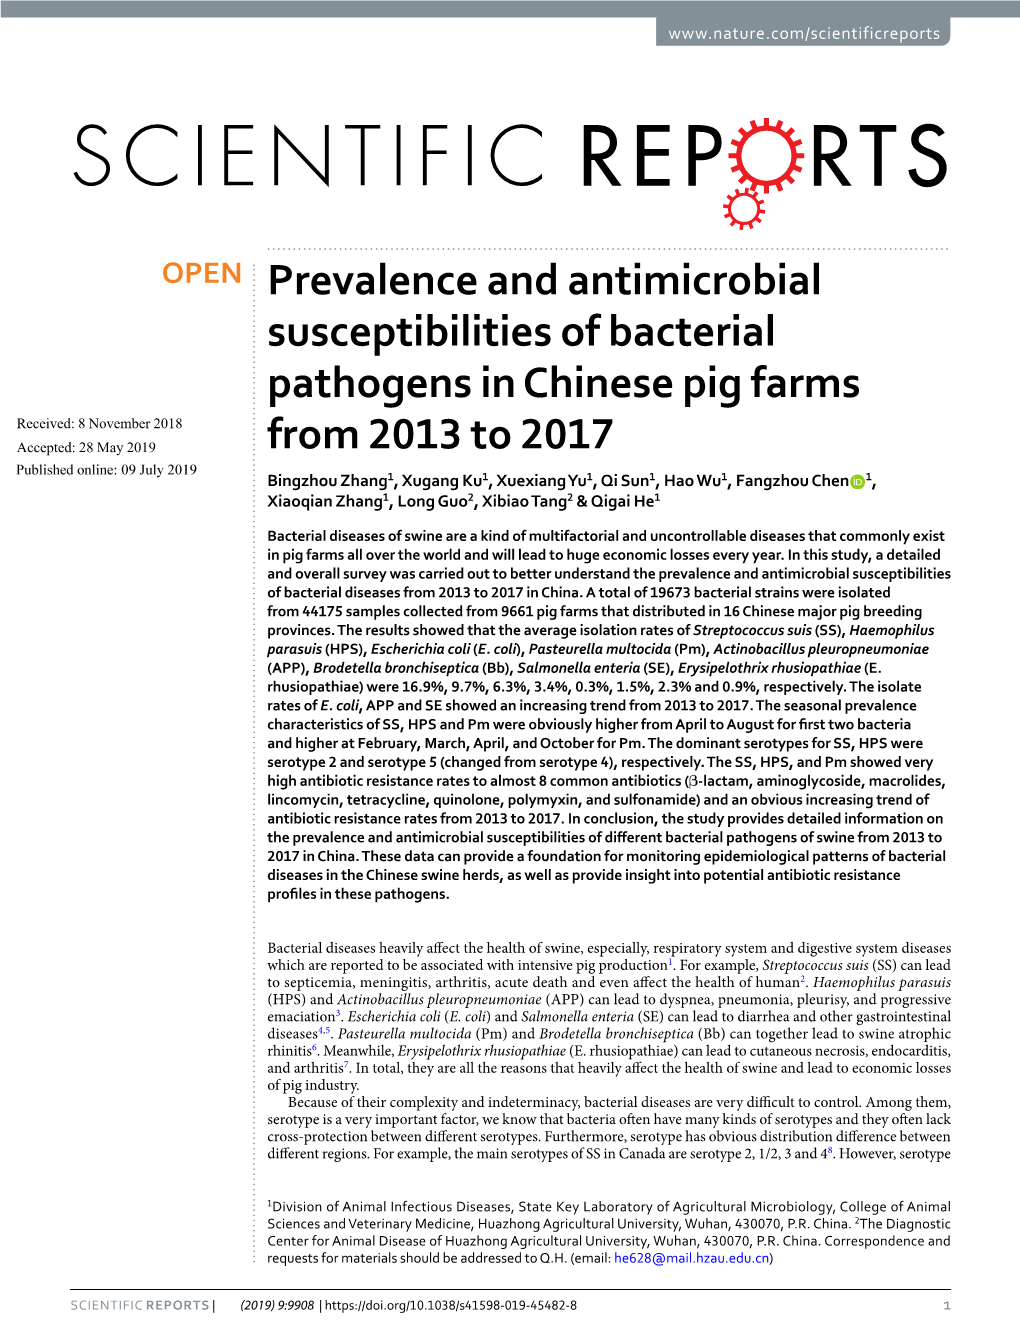 Prevalence and Antimicrobial Susceptibilities of Bacterial